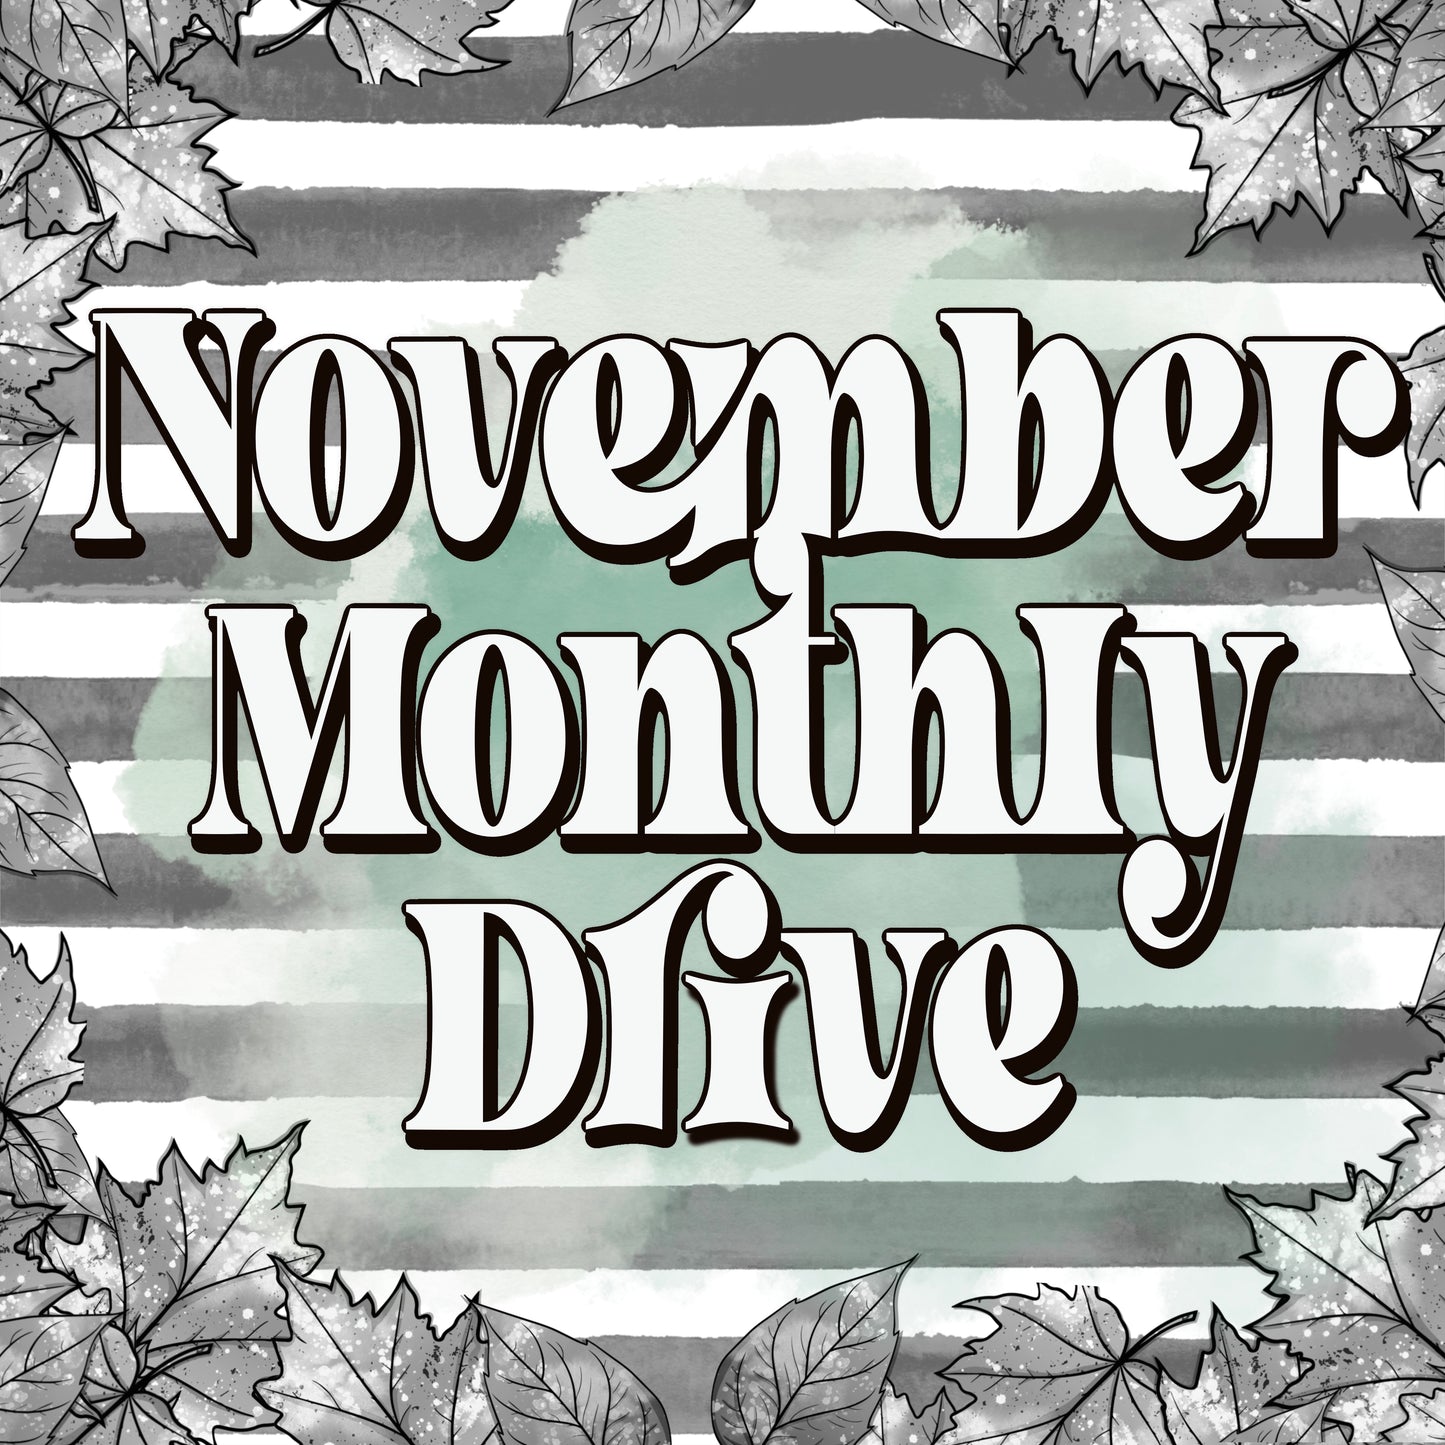 November Monthly Drive